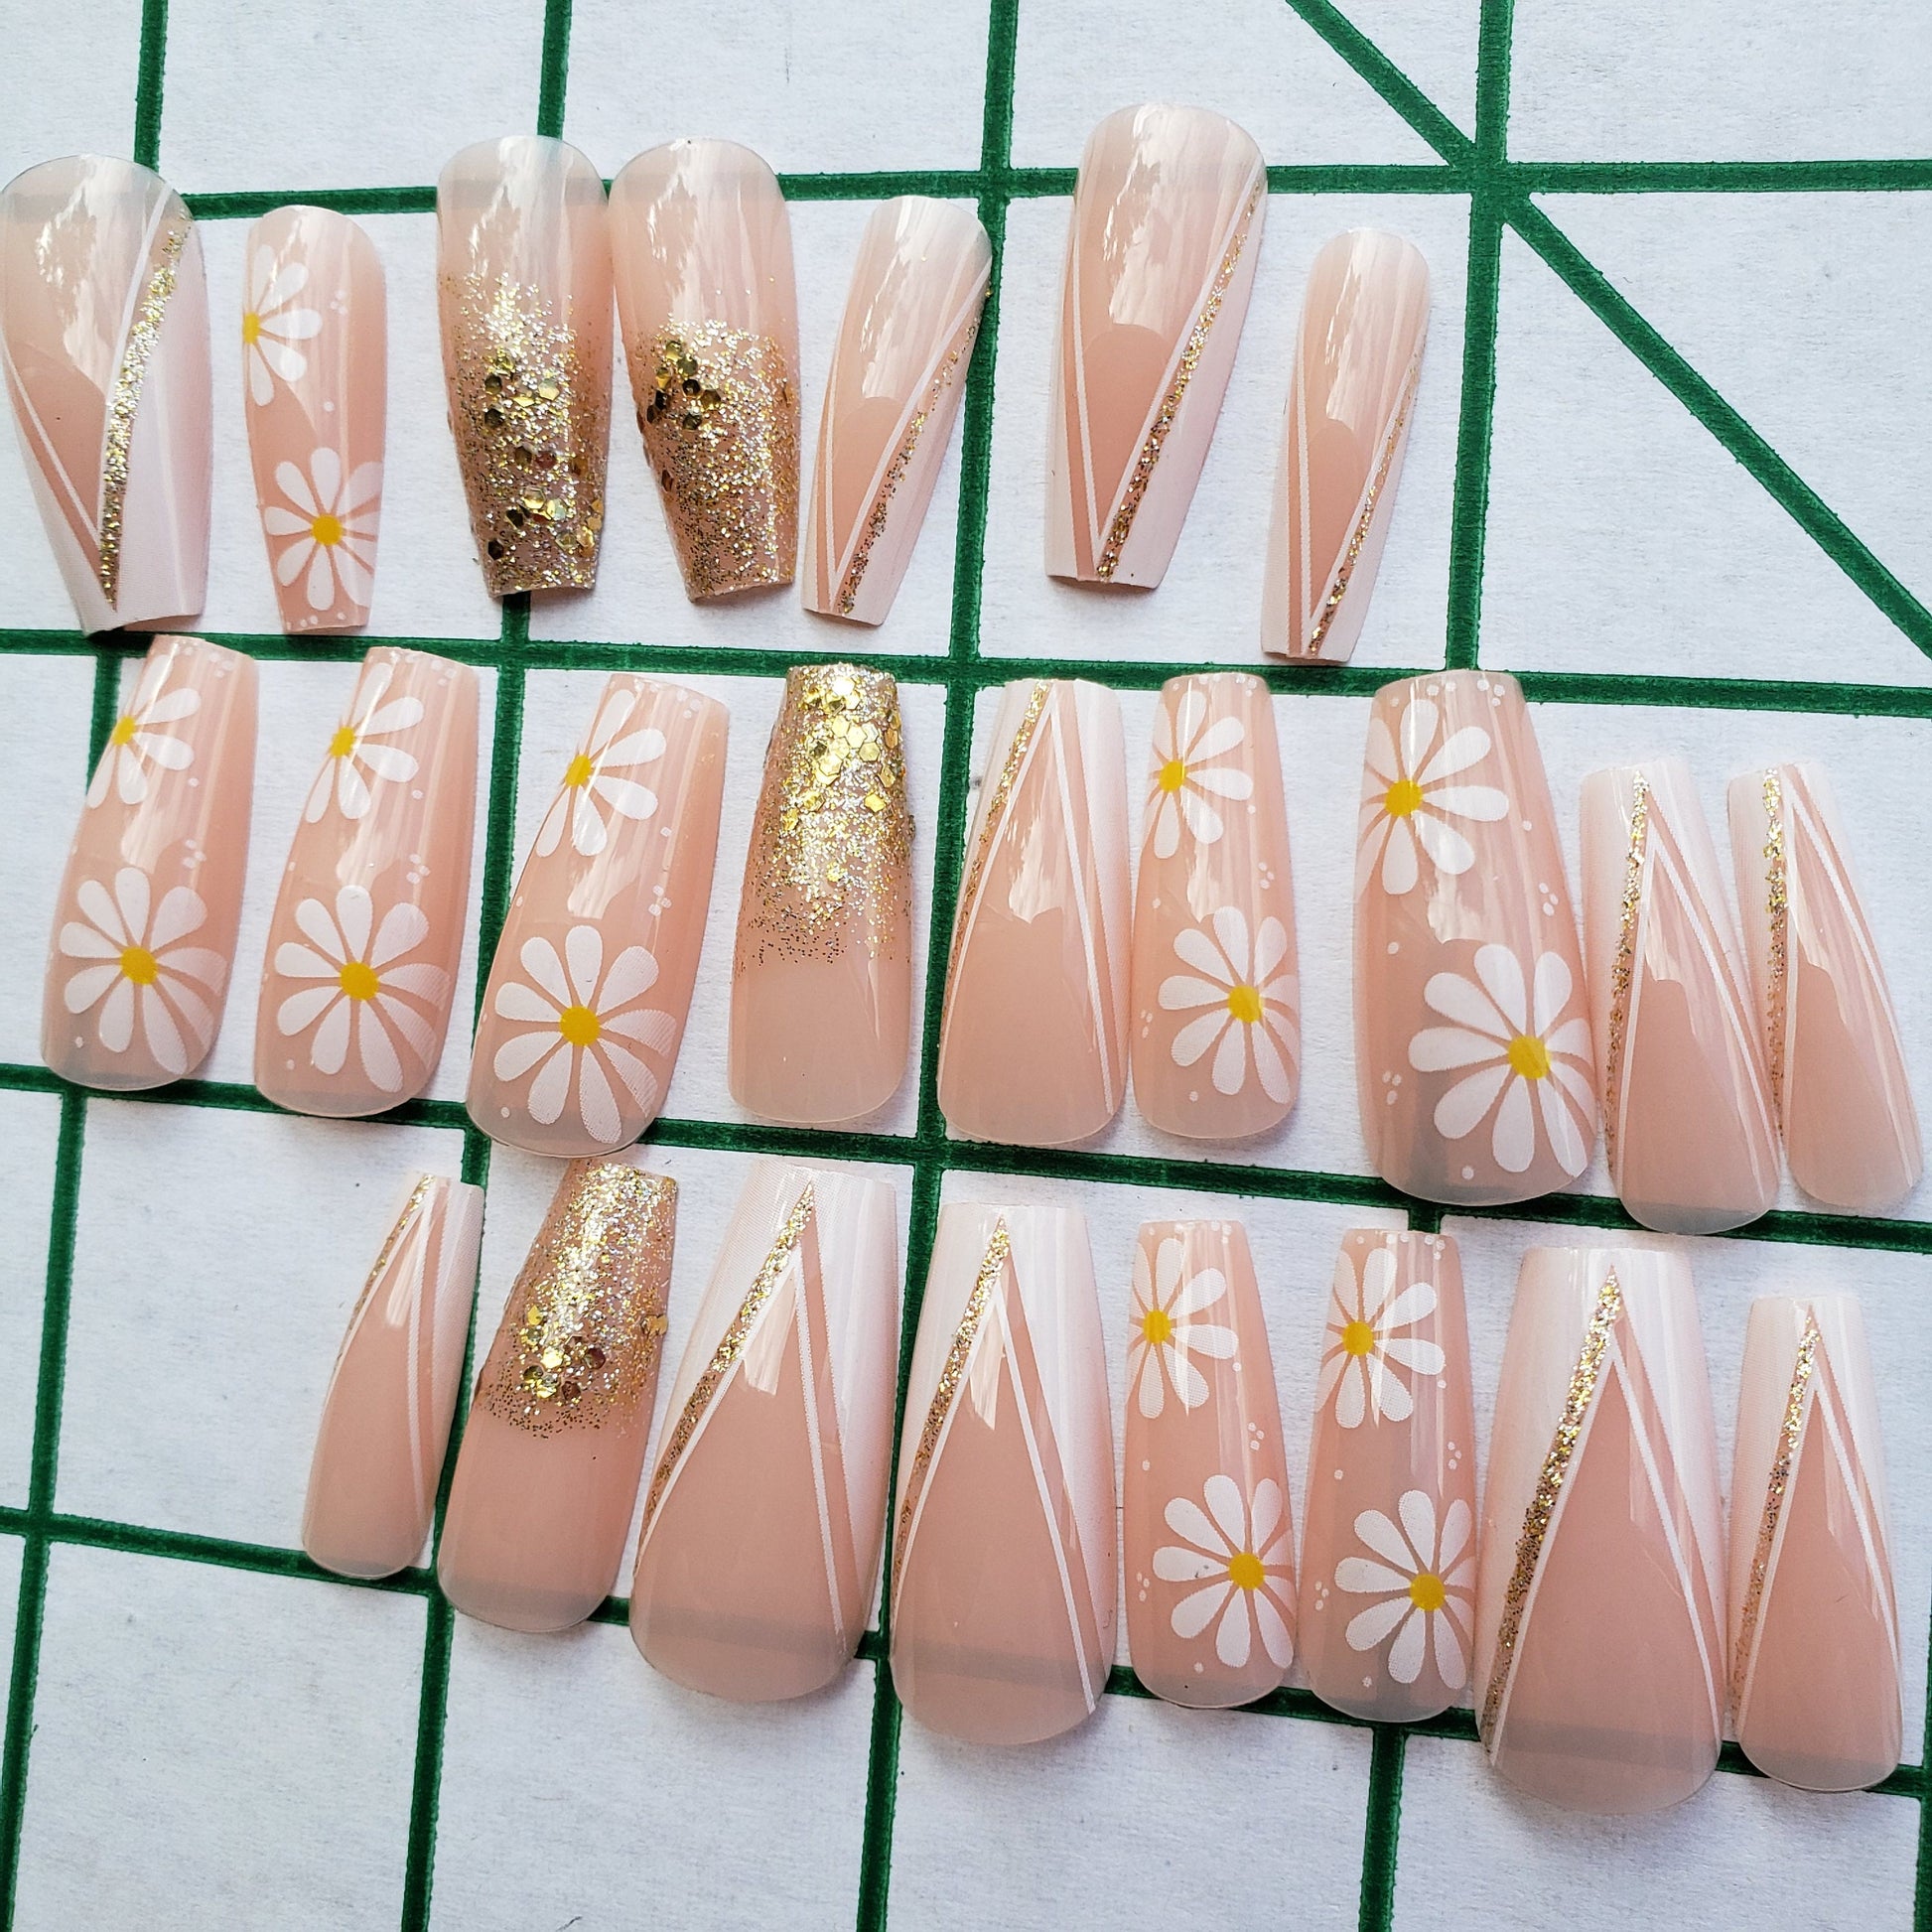 24 Sunflower Long Press On Nails kit Nude Champagne gold Glitter glue on long coffin French white tip